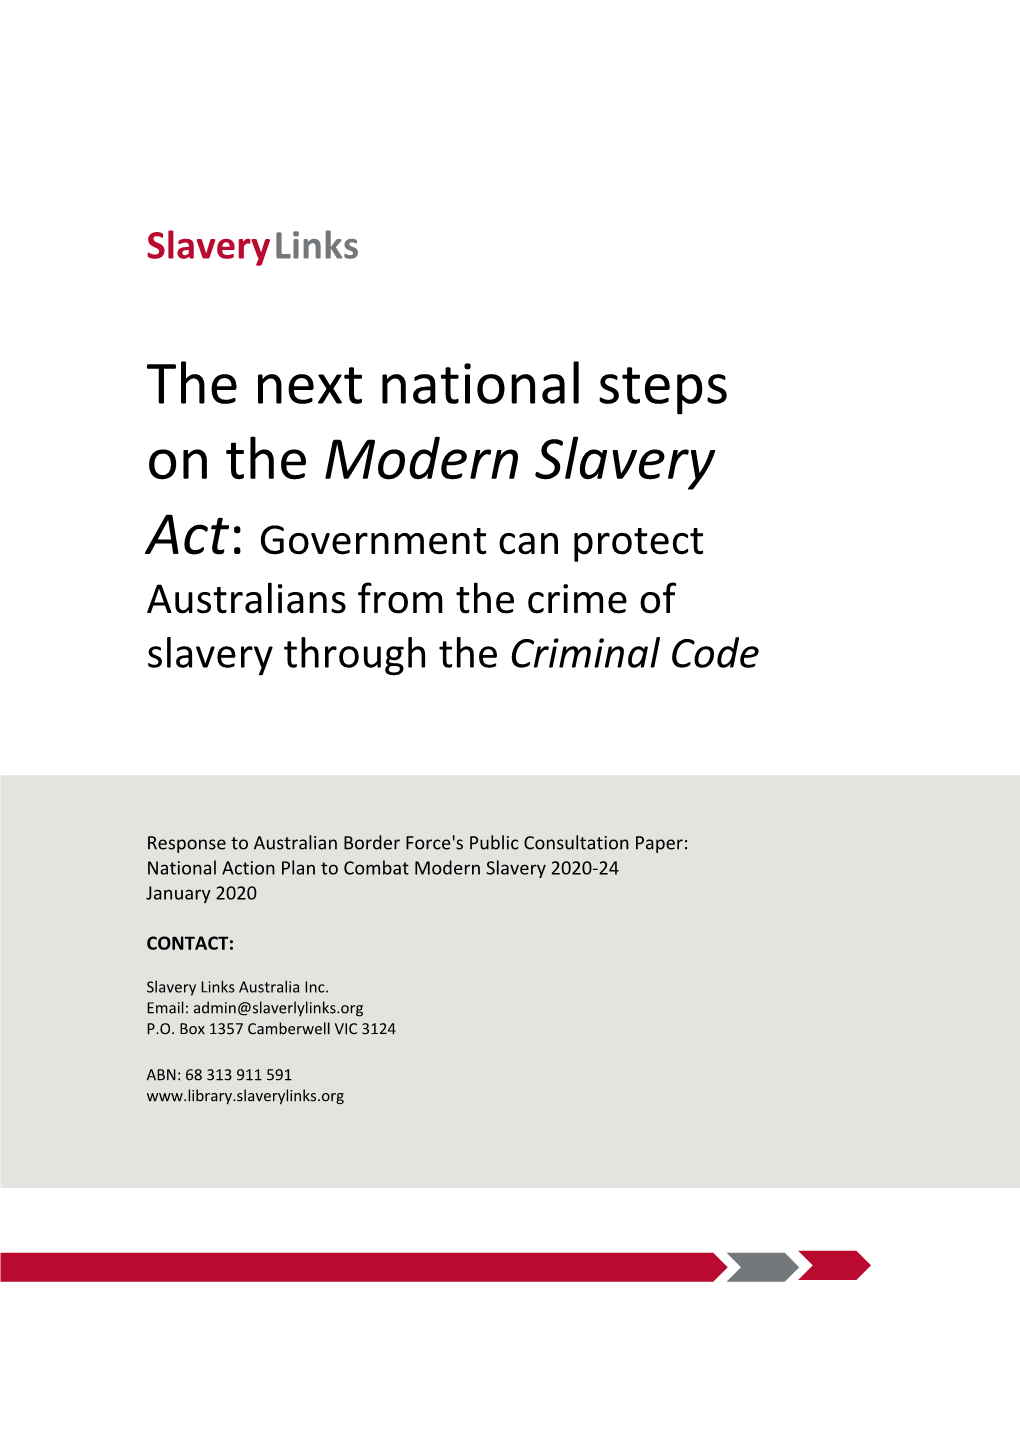 The Next National Steps on the Modern Slavery Act: Government Can Protect Australians from the Crime of Slavery Through the Criminal Code